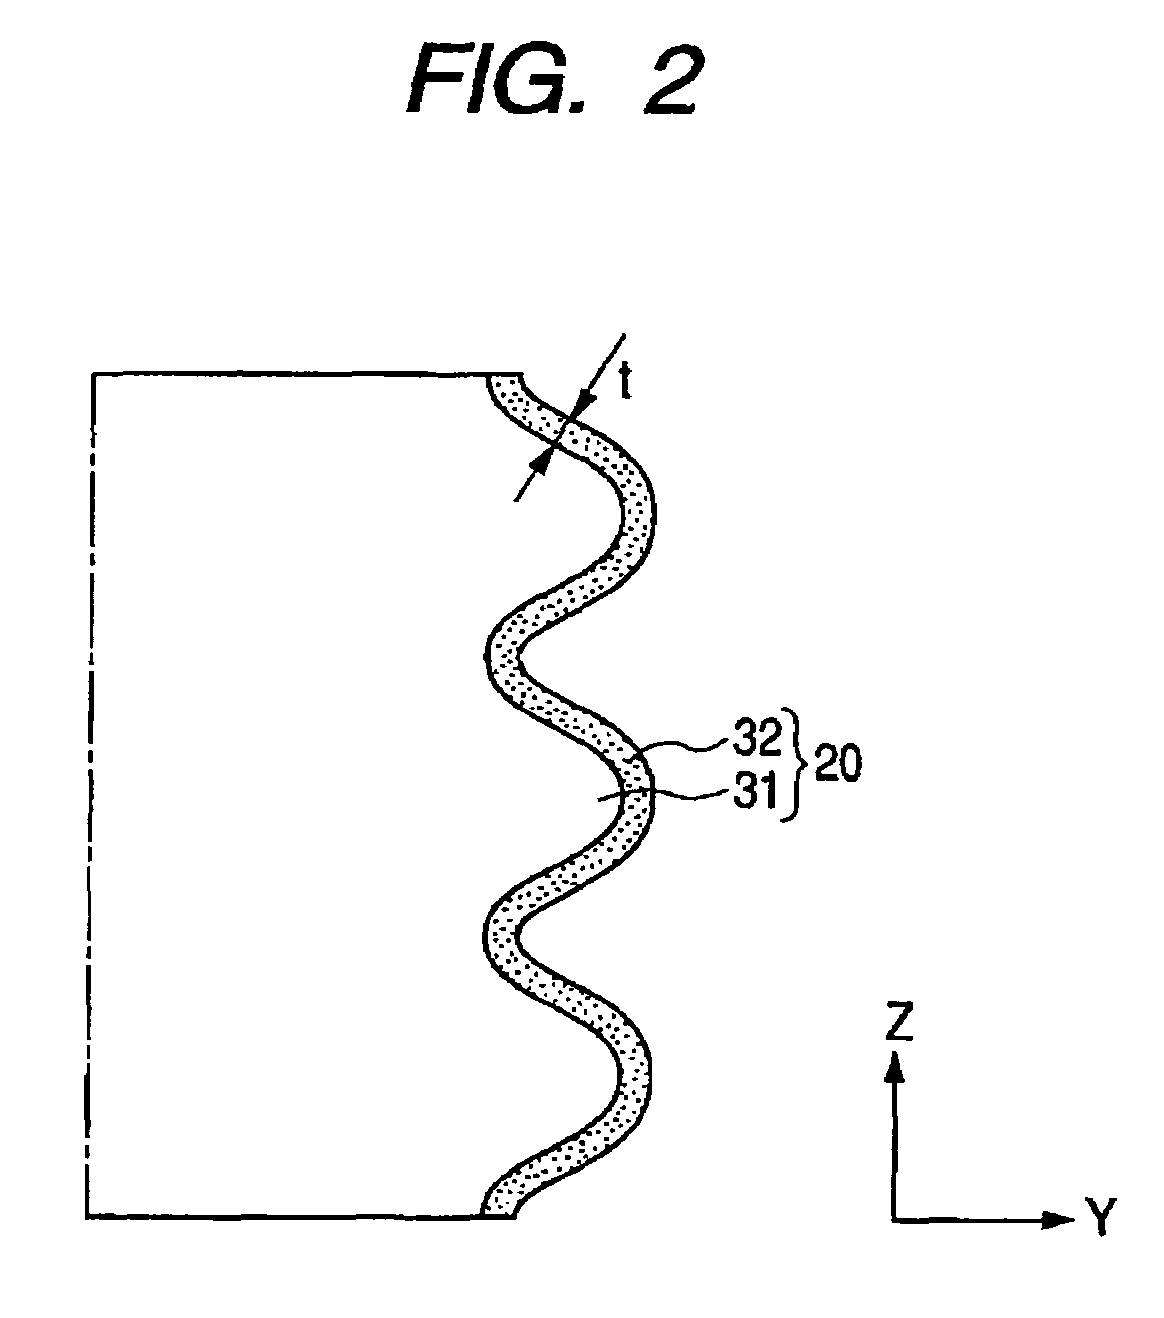 Spacer structure for image forming apparatus